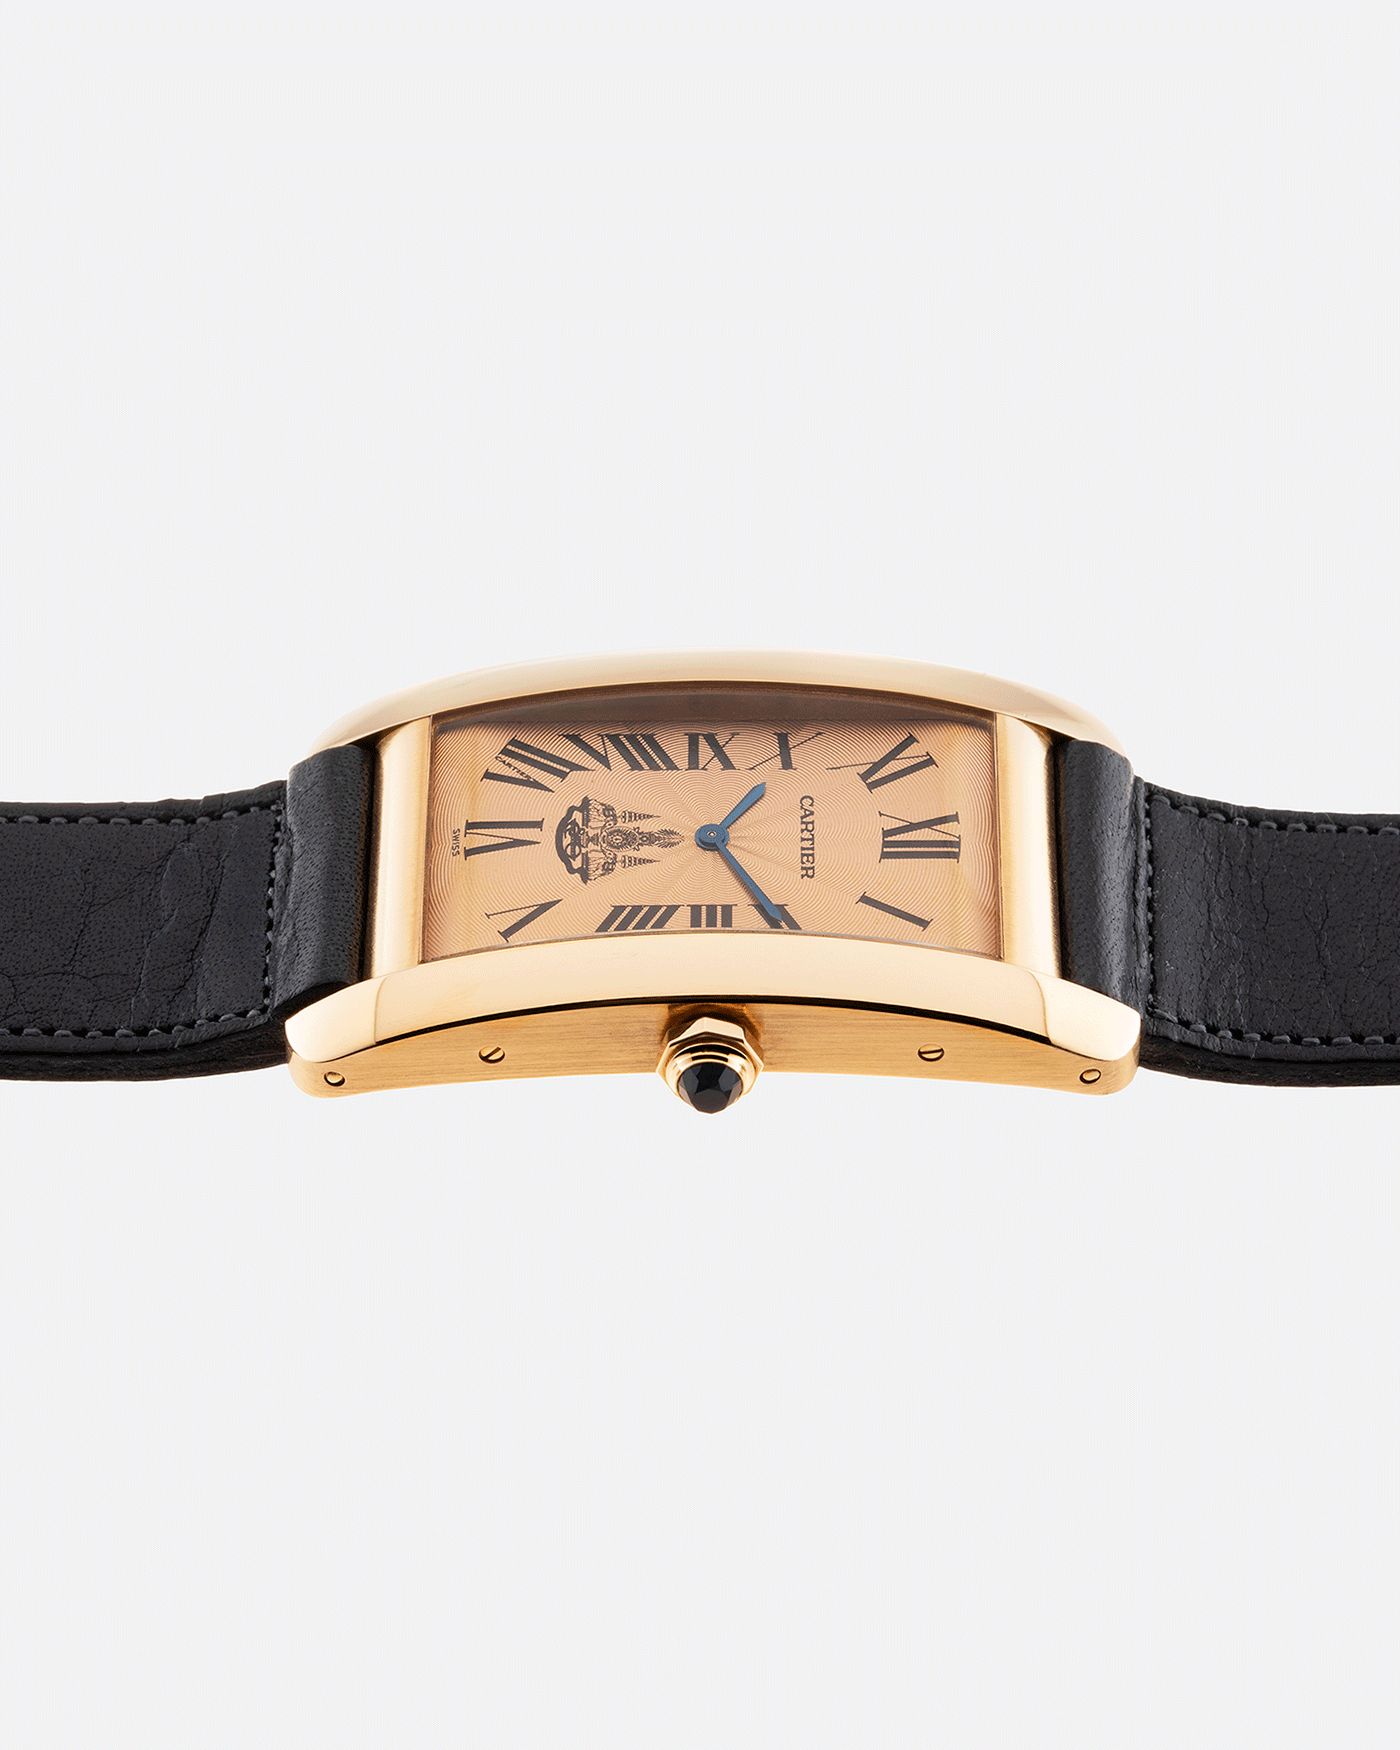 Brand: Cartier Year: 1996 Model: Tank Americaine ‘Thai King’ Reference: 1735 Material: 18k Yellow Gold Movement: Cartier Caliber 430 MC Case Diameter: 45mm X26mm Strap: Navy Blue Accurate Form Calf Strap with separate 18k Cartier Yellow Gold Deployant